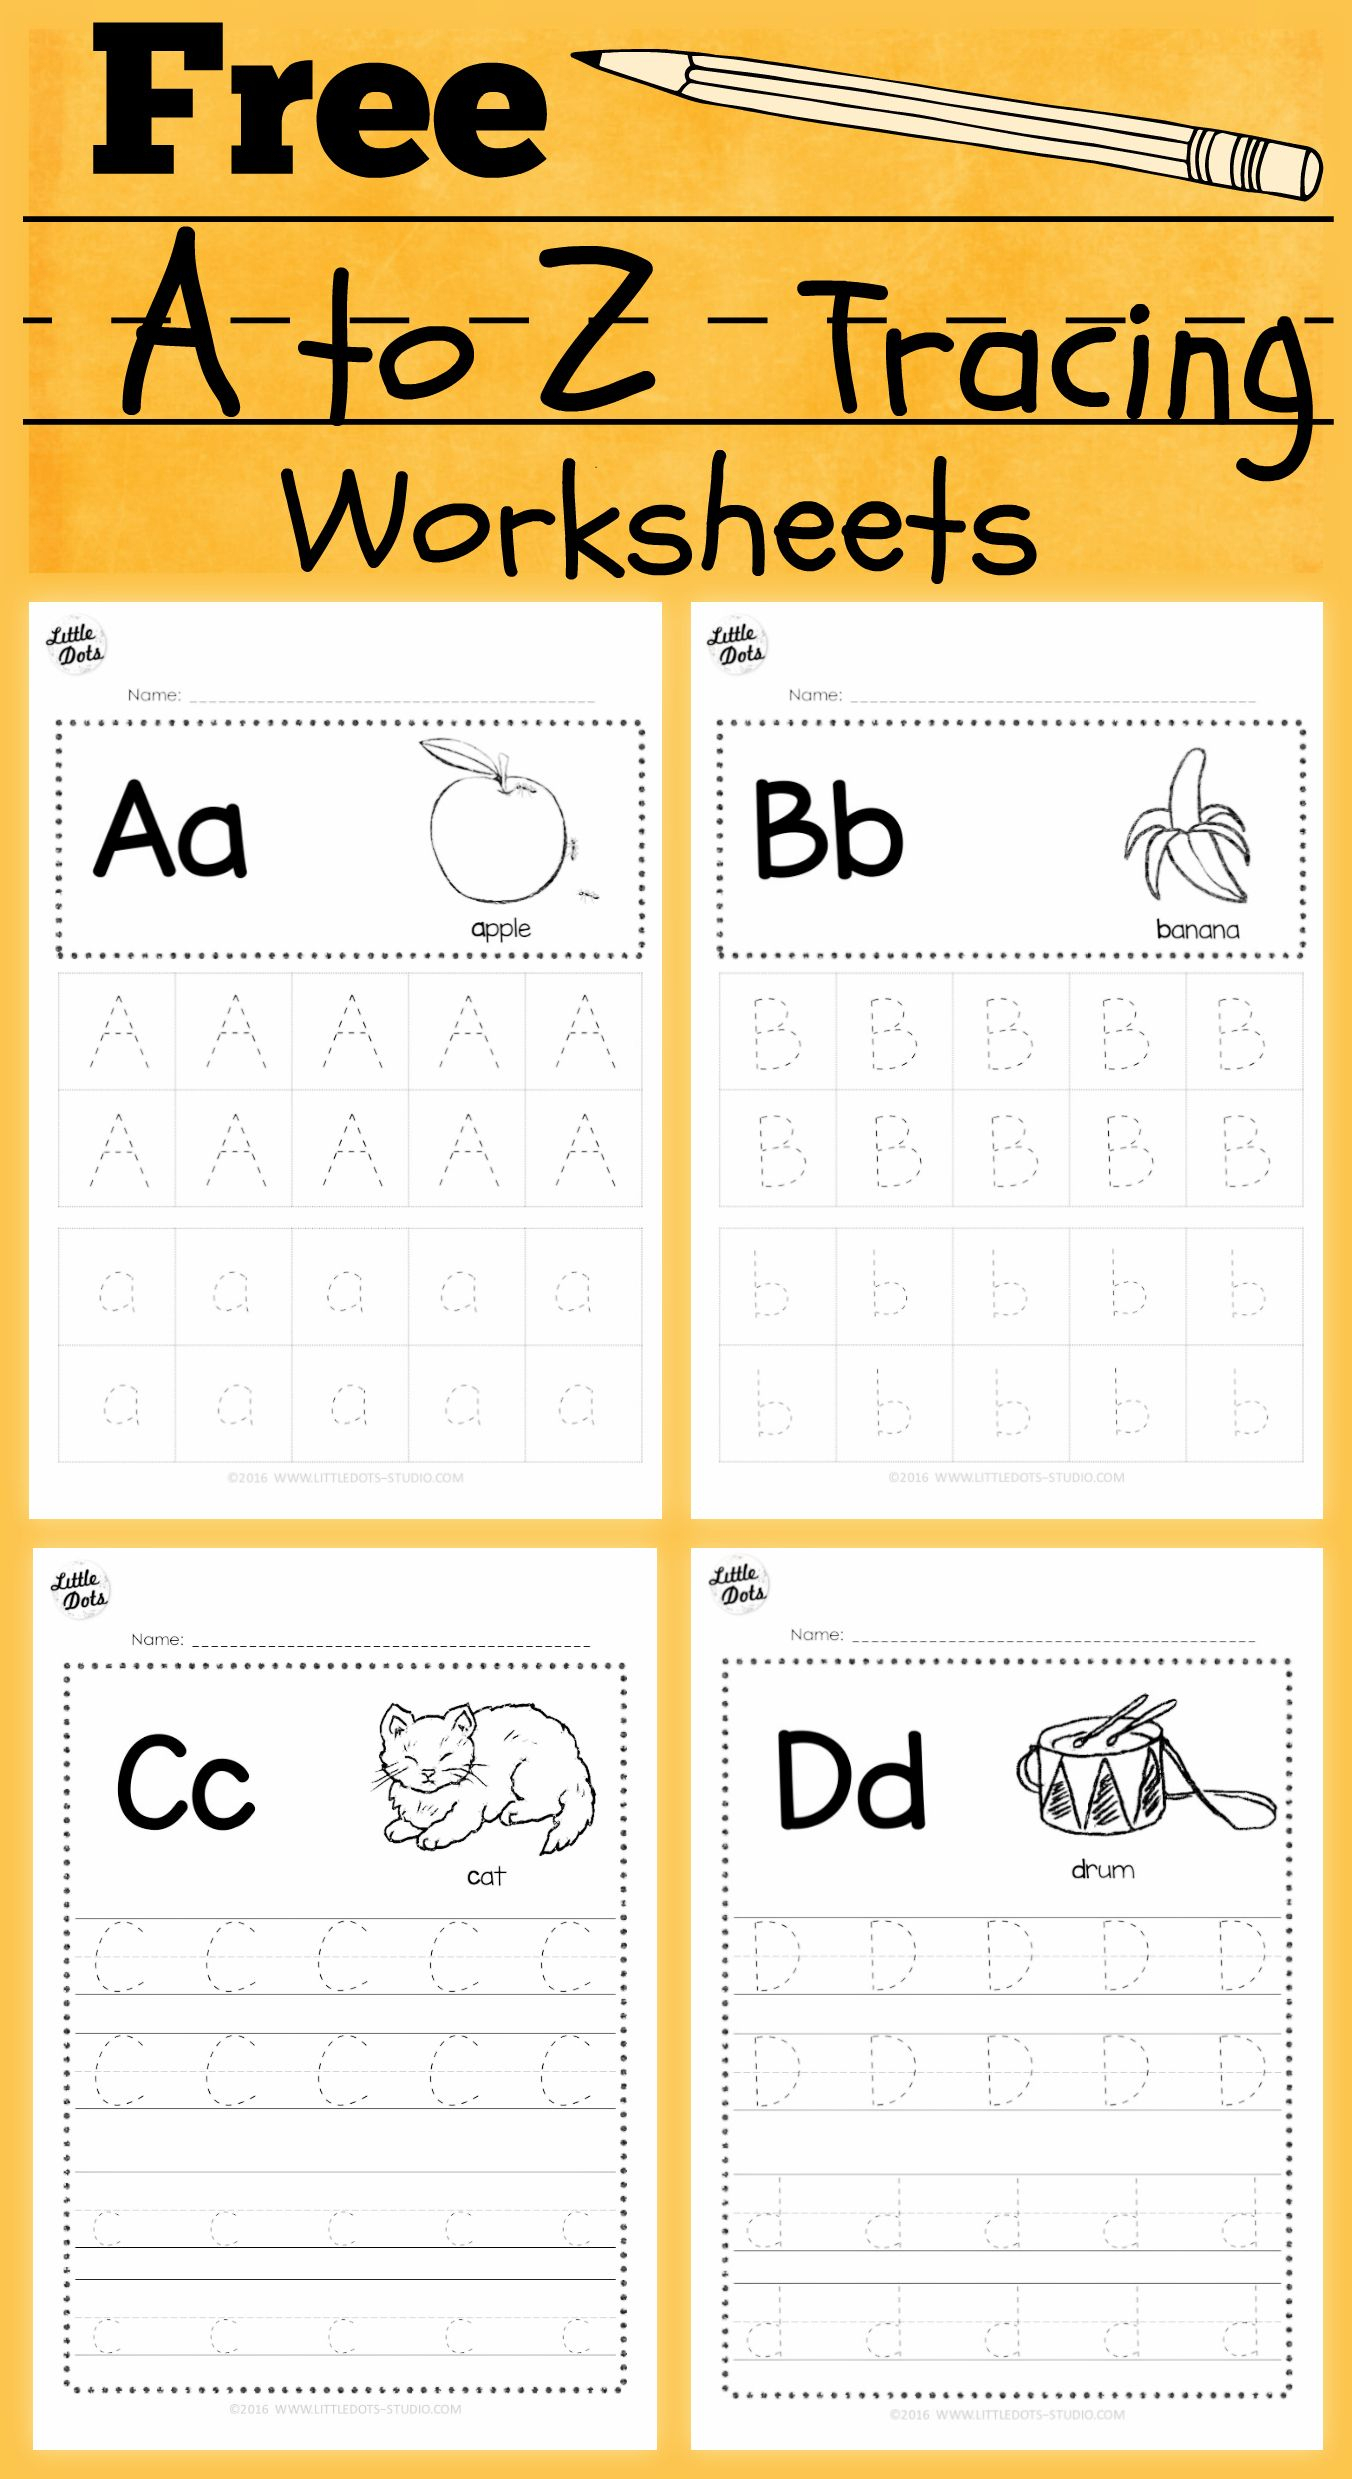 Download Free Alphabet Tracing Worksheets For Letter A To Z throughout Downloadable Tracing Letters